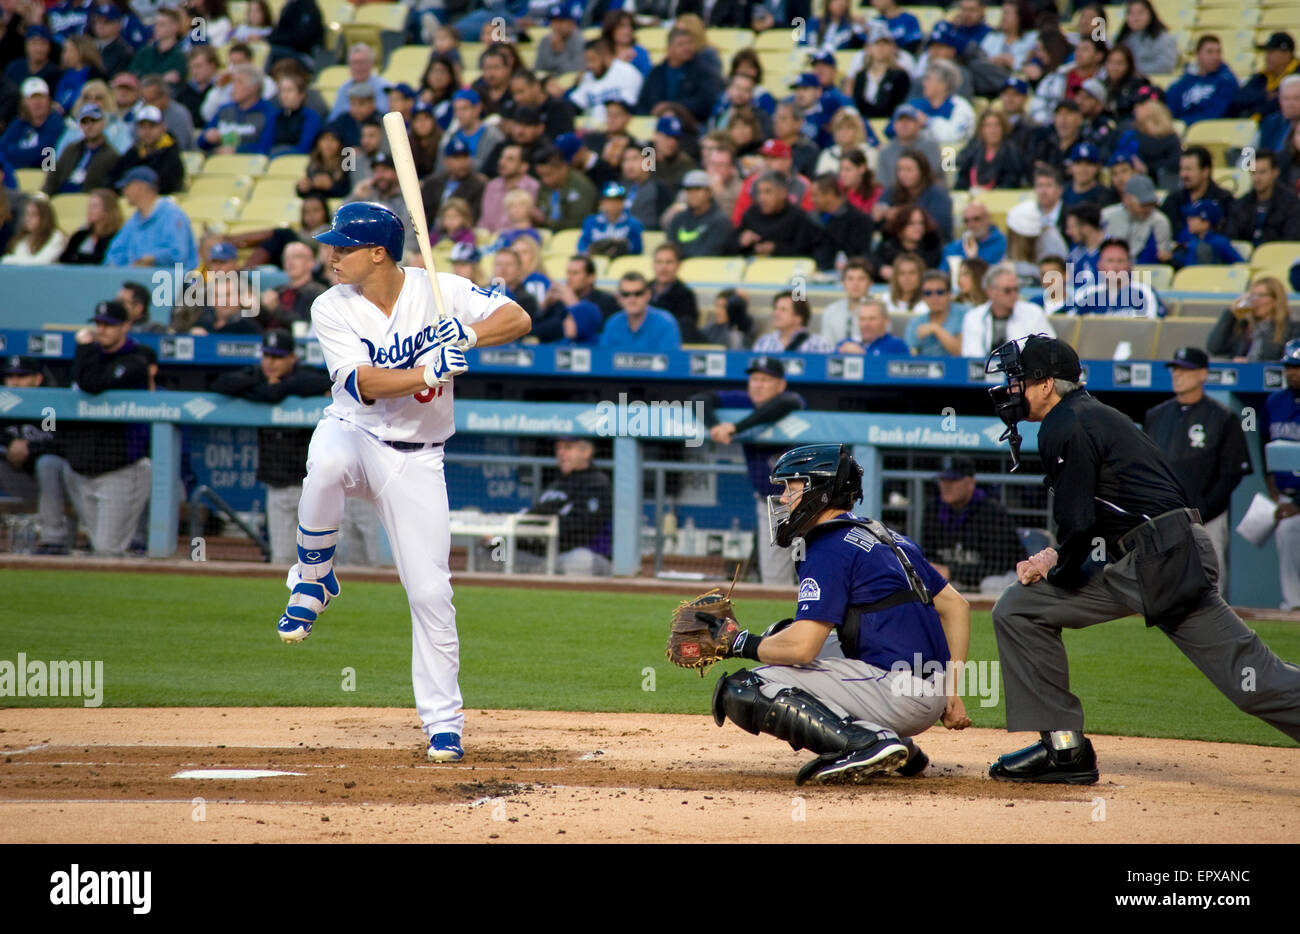 Los Angeles Dodger player Joc Pederson with leg kick in preparation of the pitch in the batters box at Dodger Stadium. Stock Photo